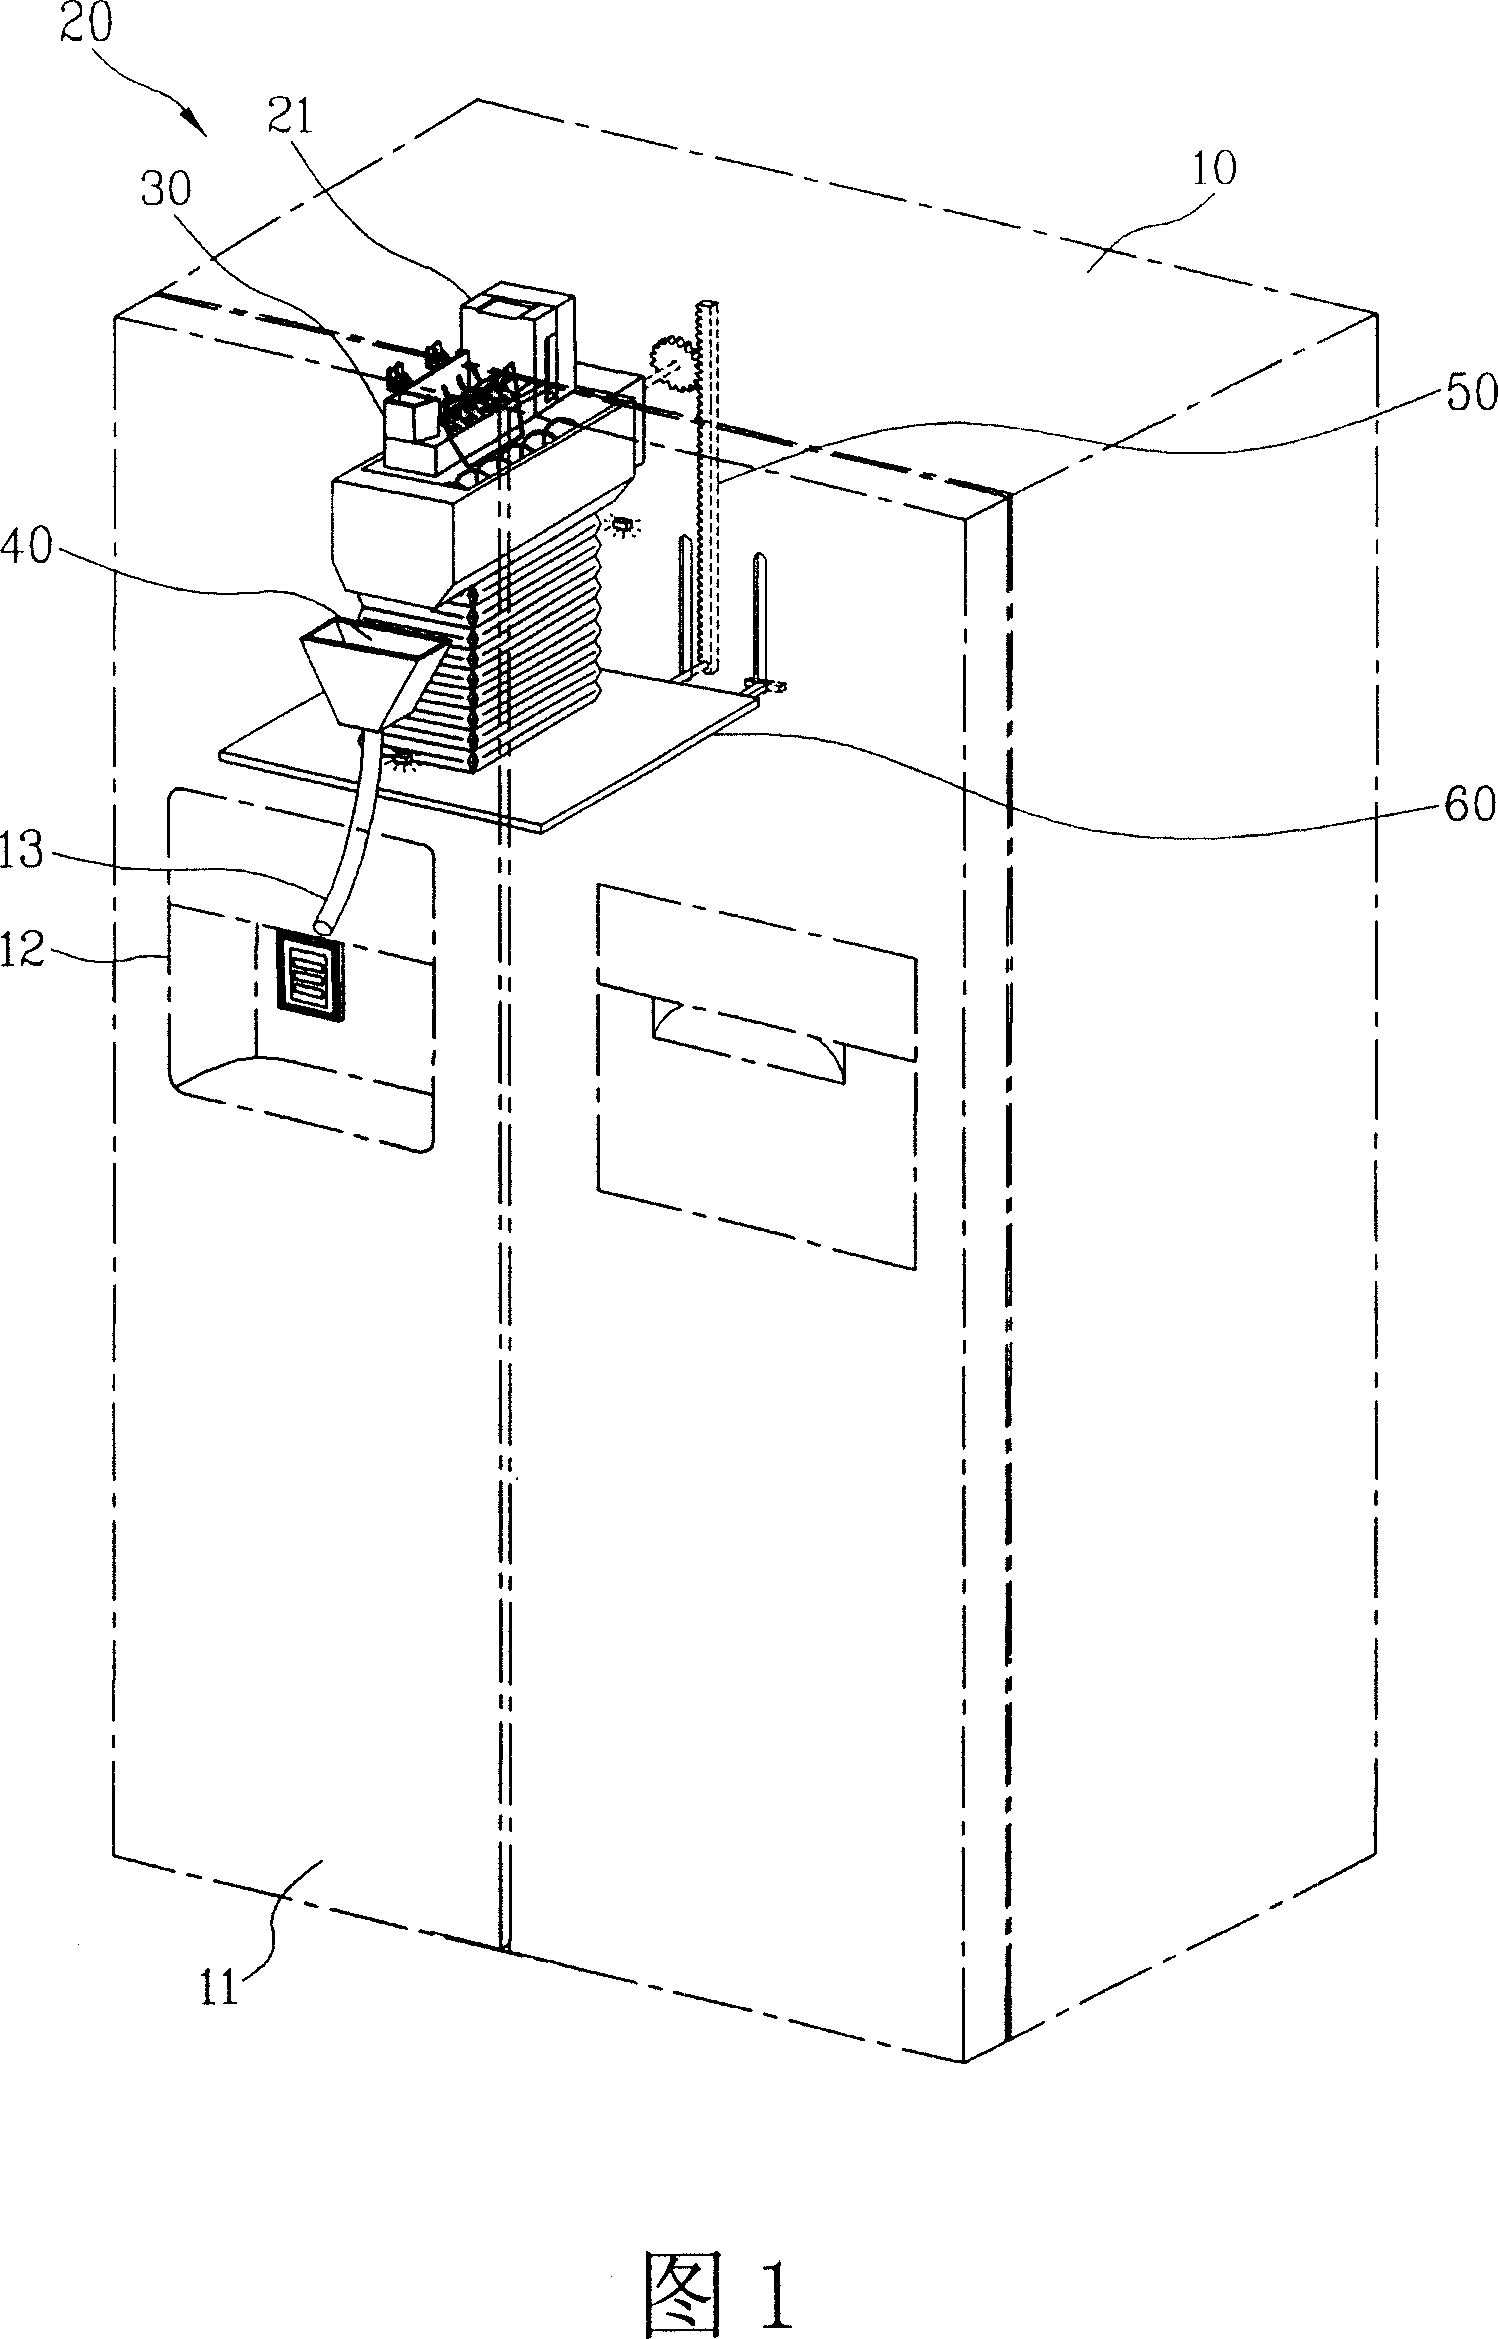 Expansion device for ice making device in refrigerator